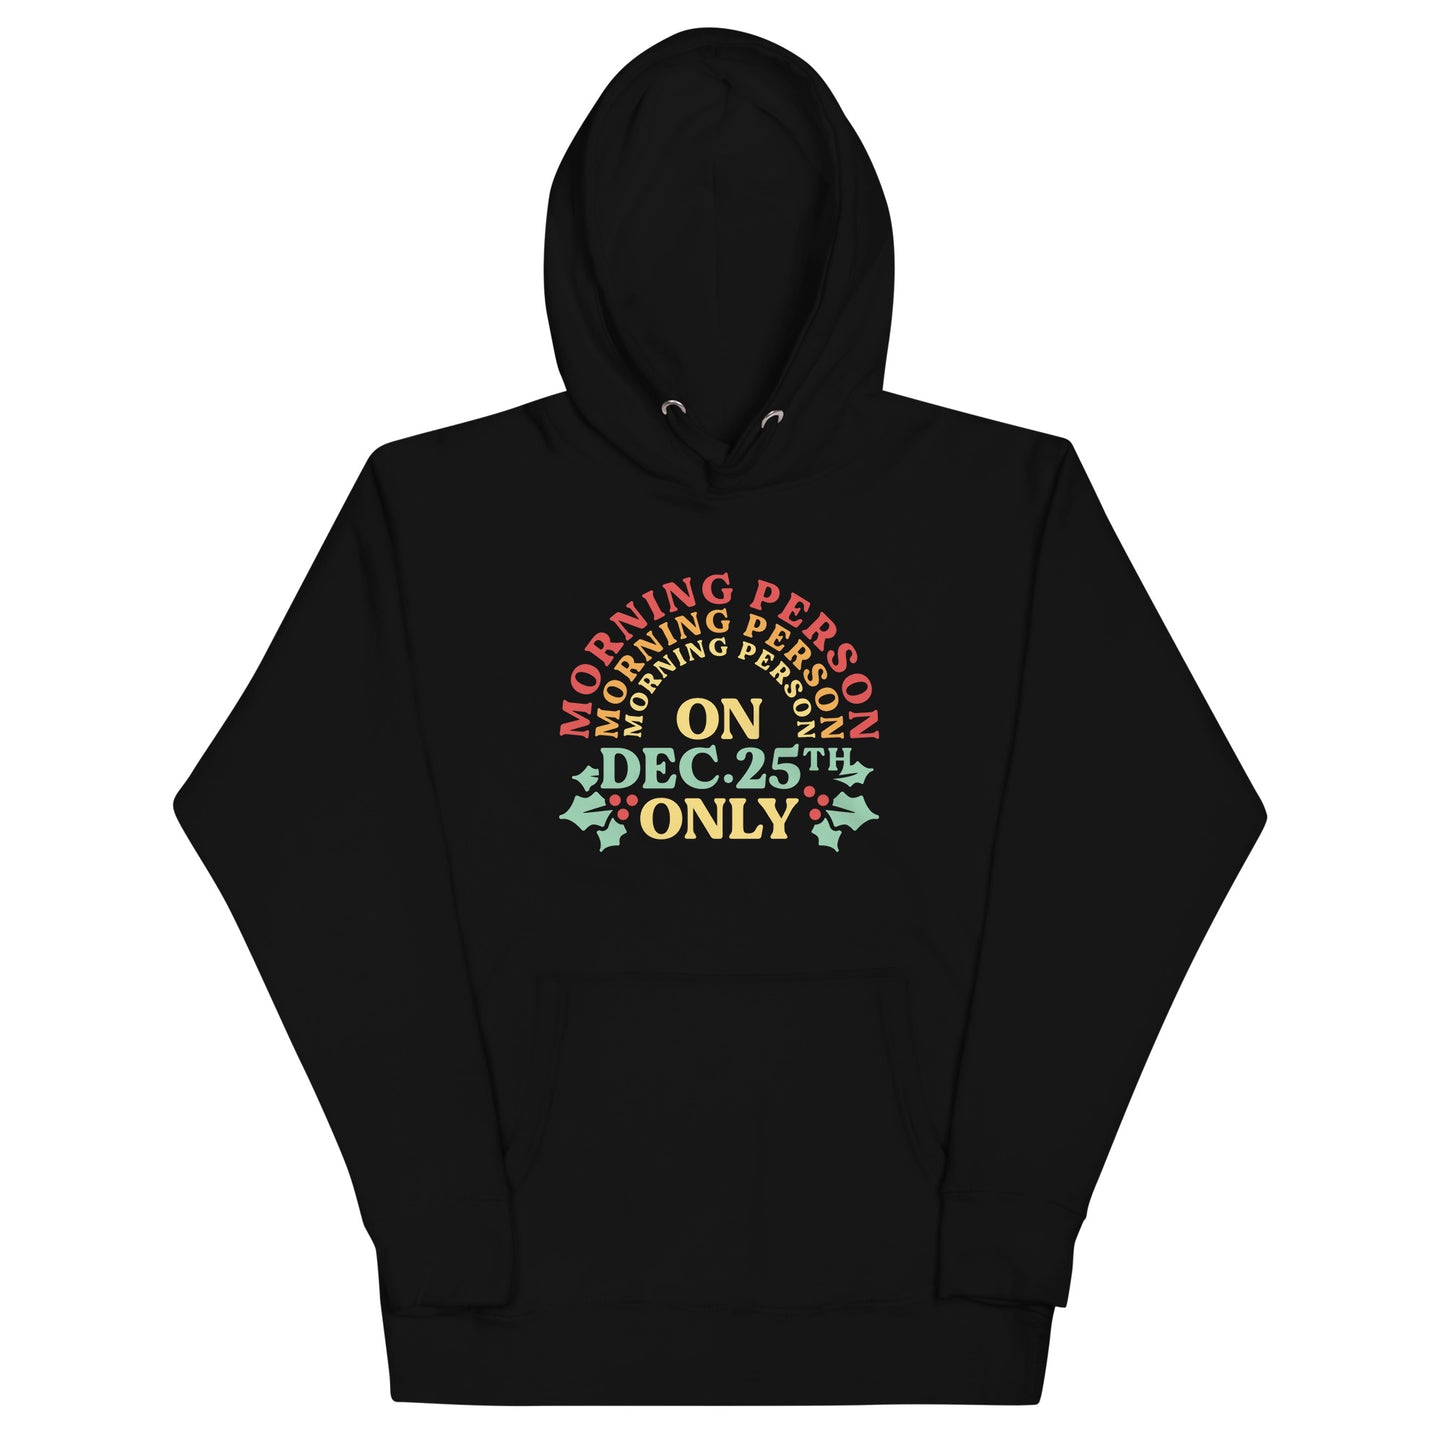 Morning Person On Dec 25th Only Unisex Hoodie